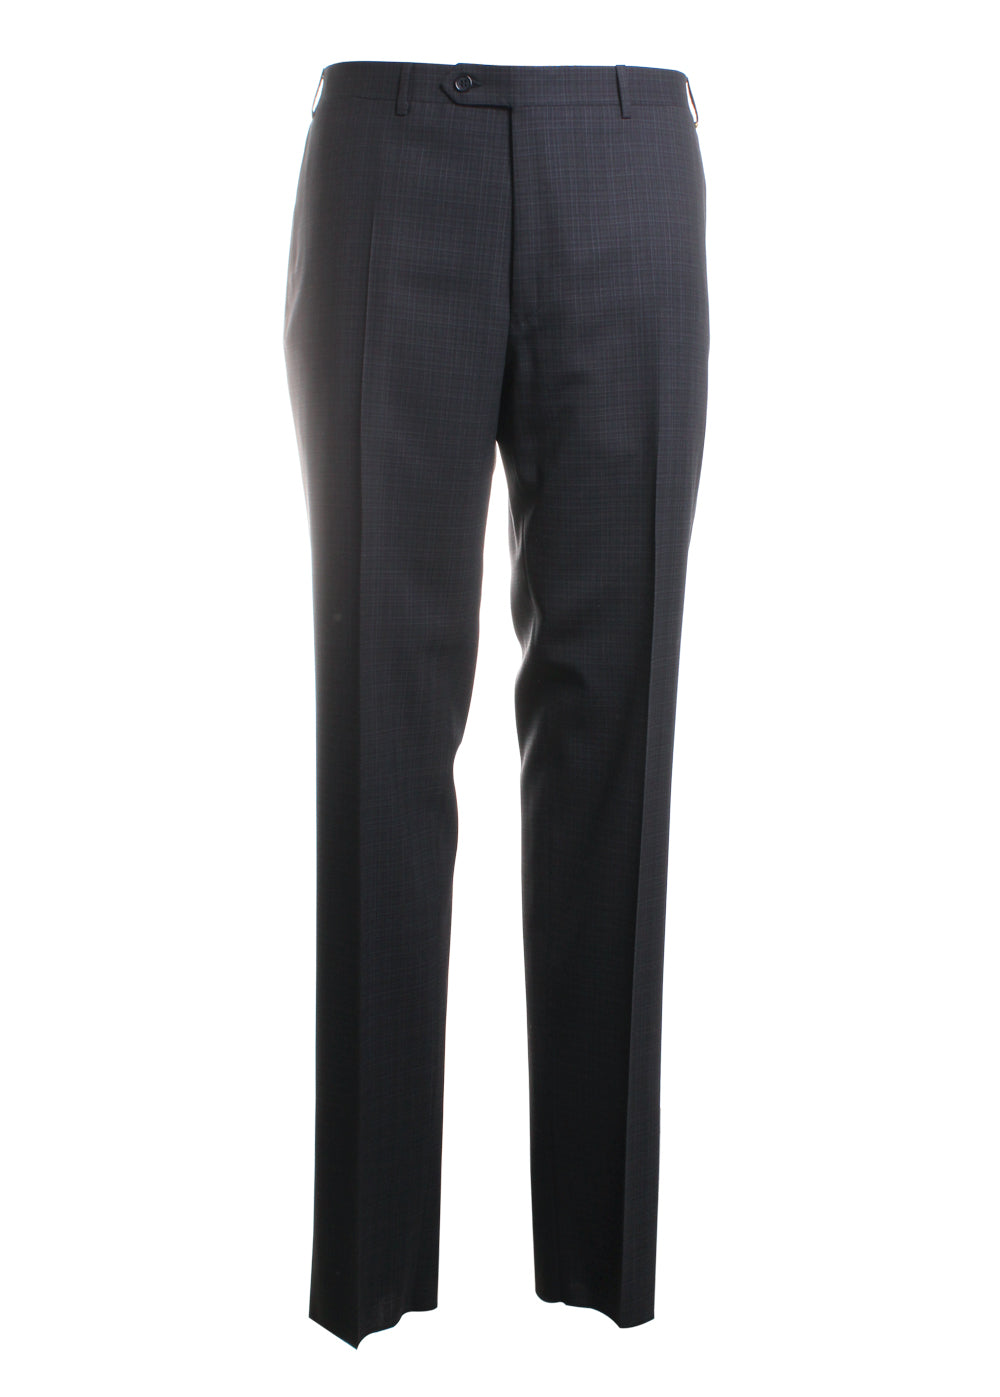 Canali Dress Pant 997 in Charcoal